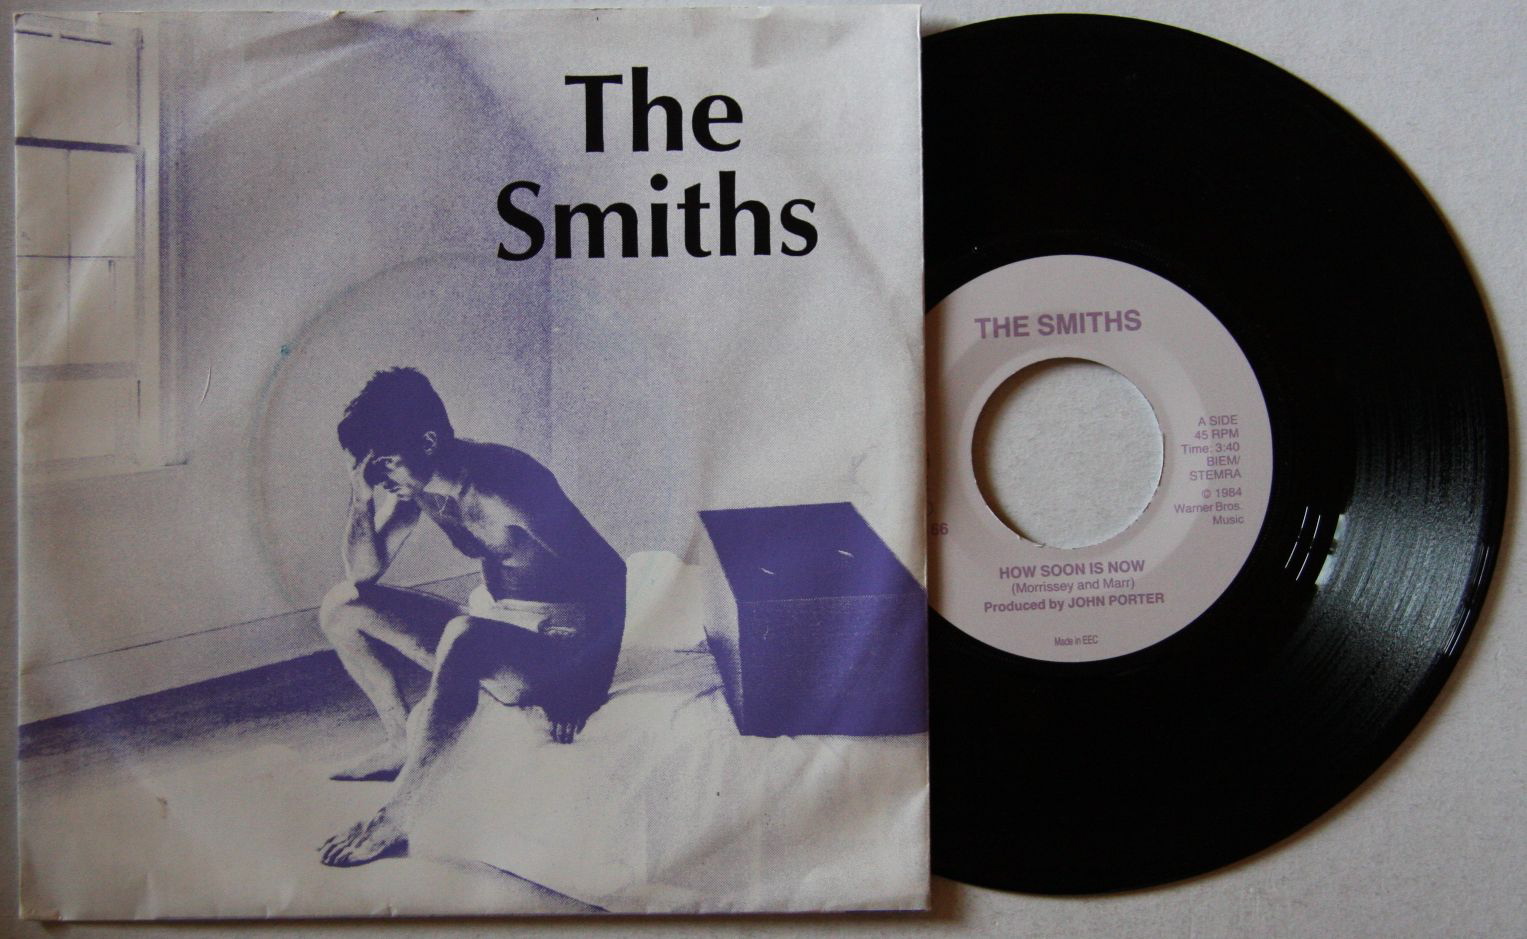 The Smiths - How Soon Is Now